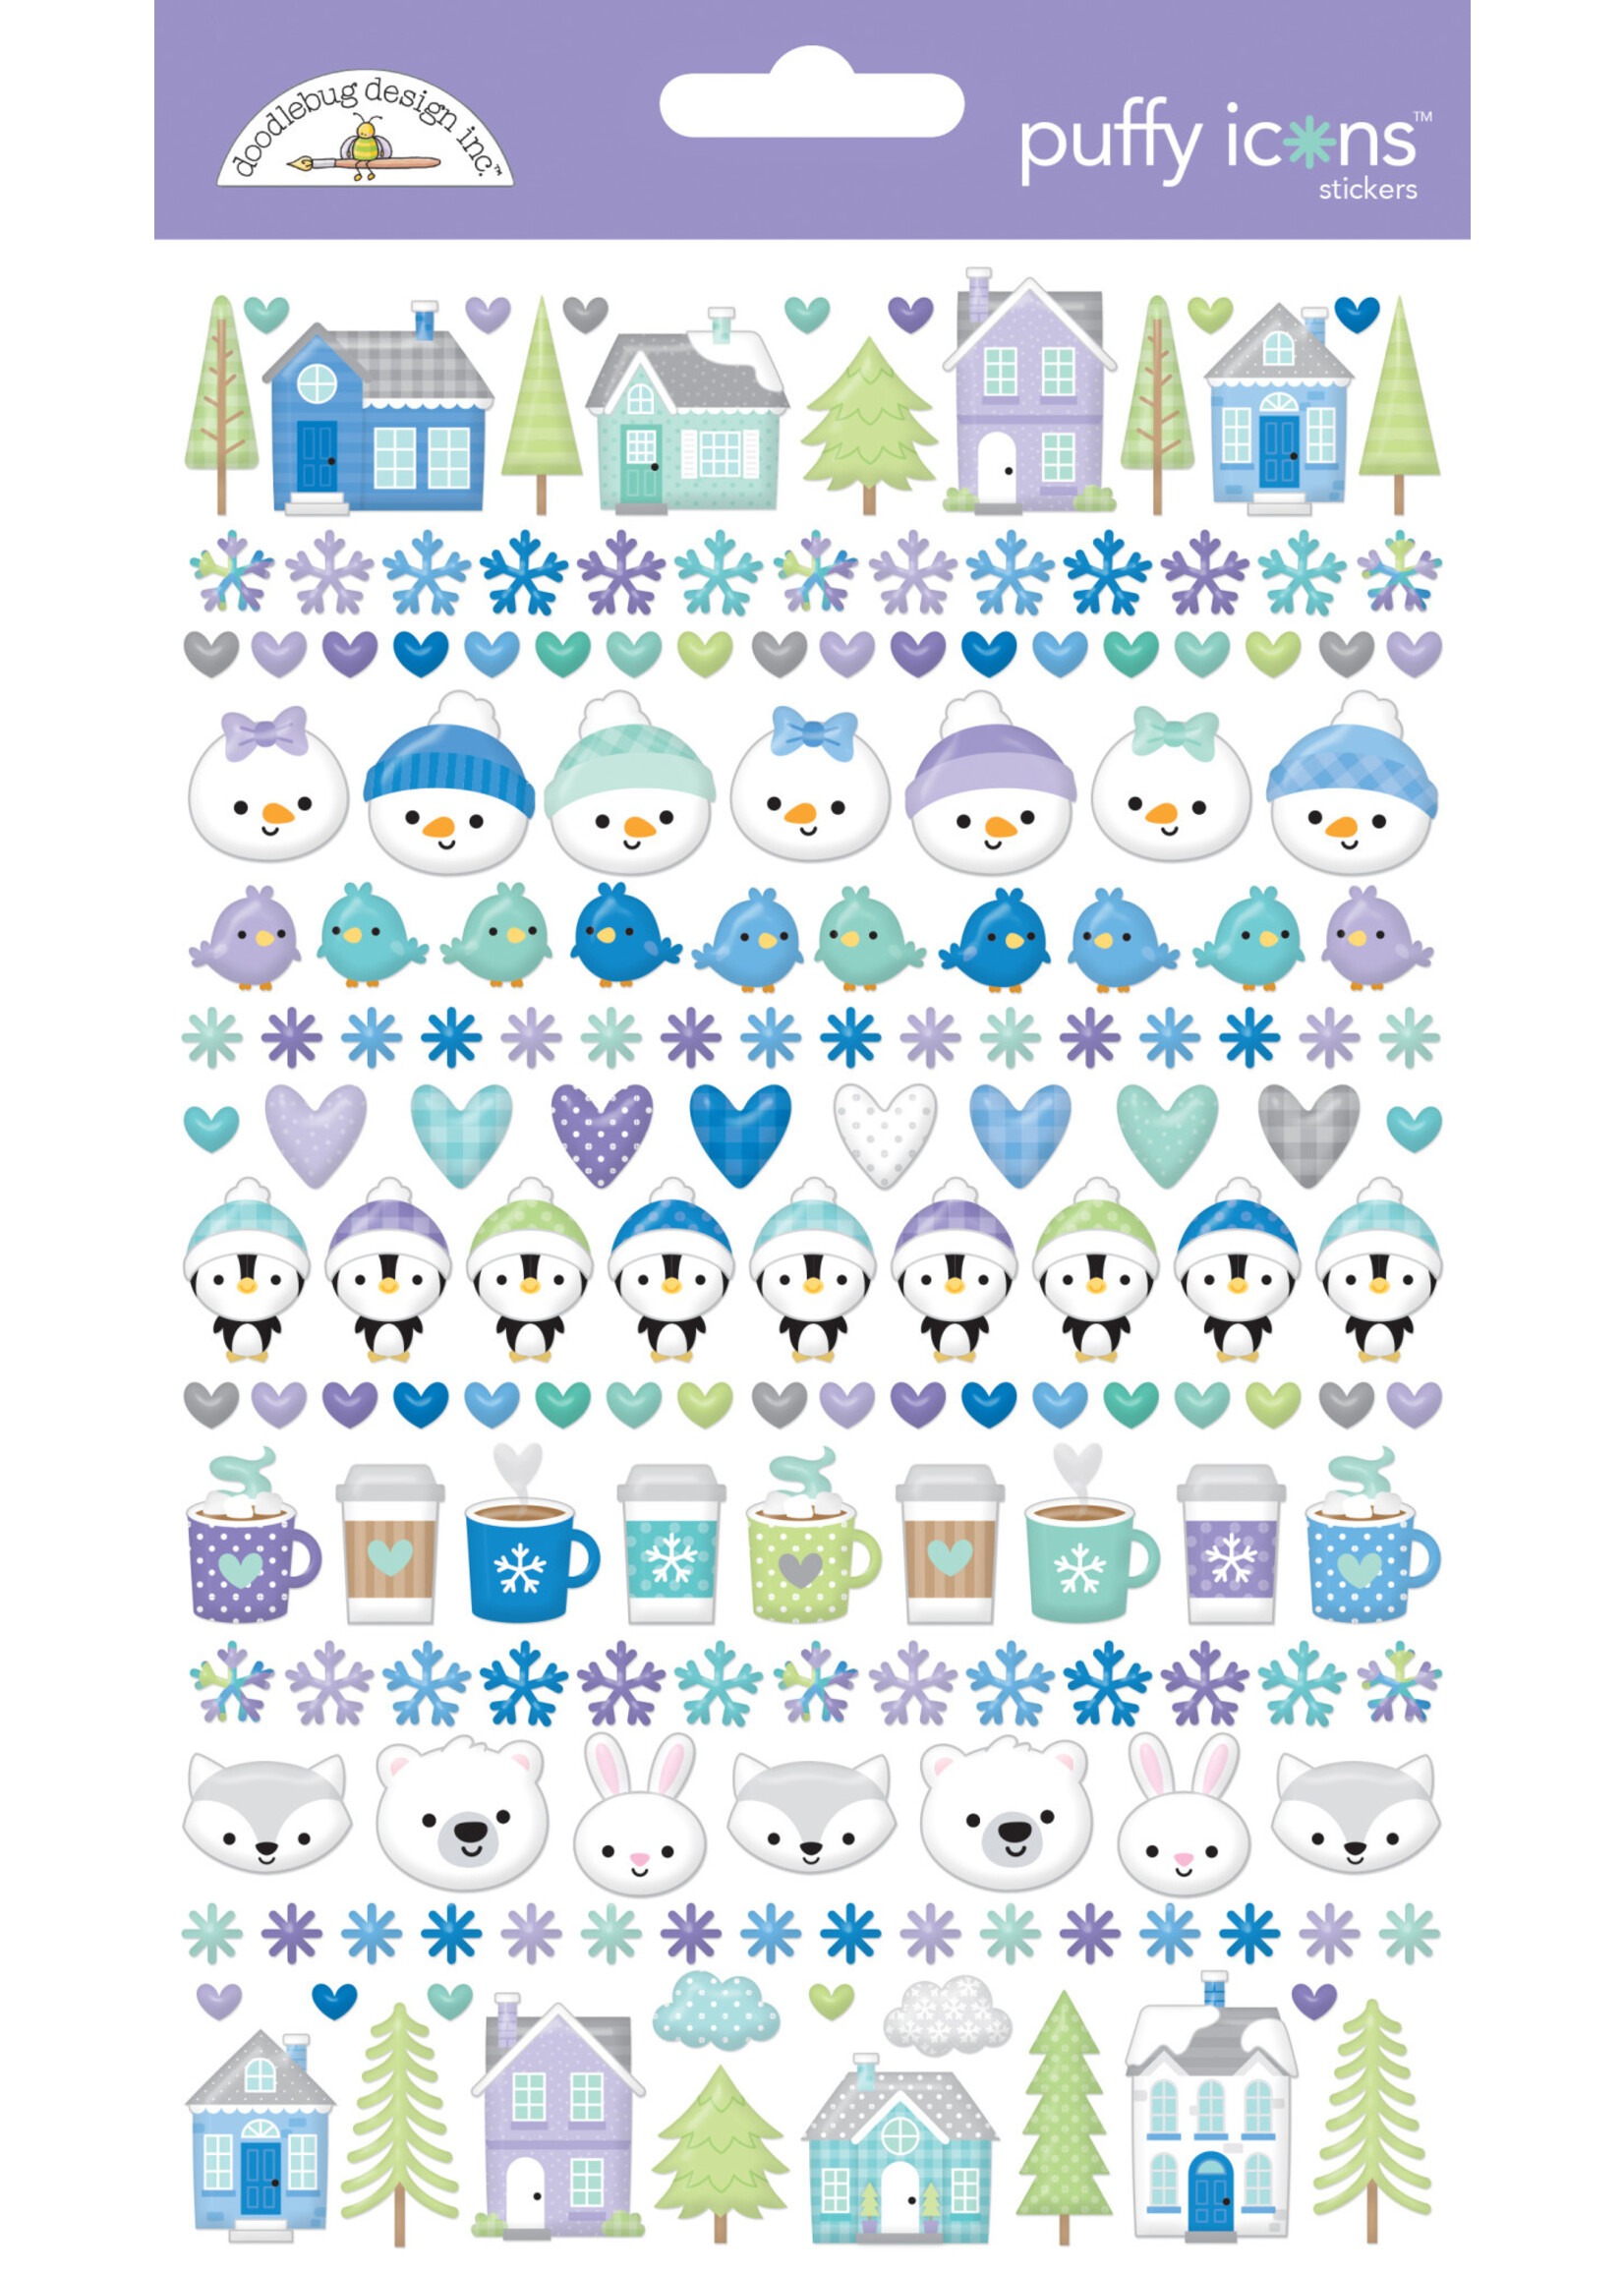 DOODLEBUG snow much fun puffy icons stickers